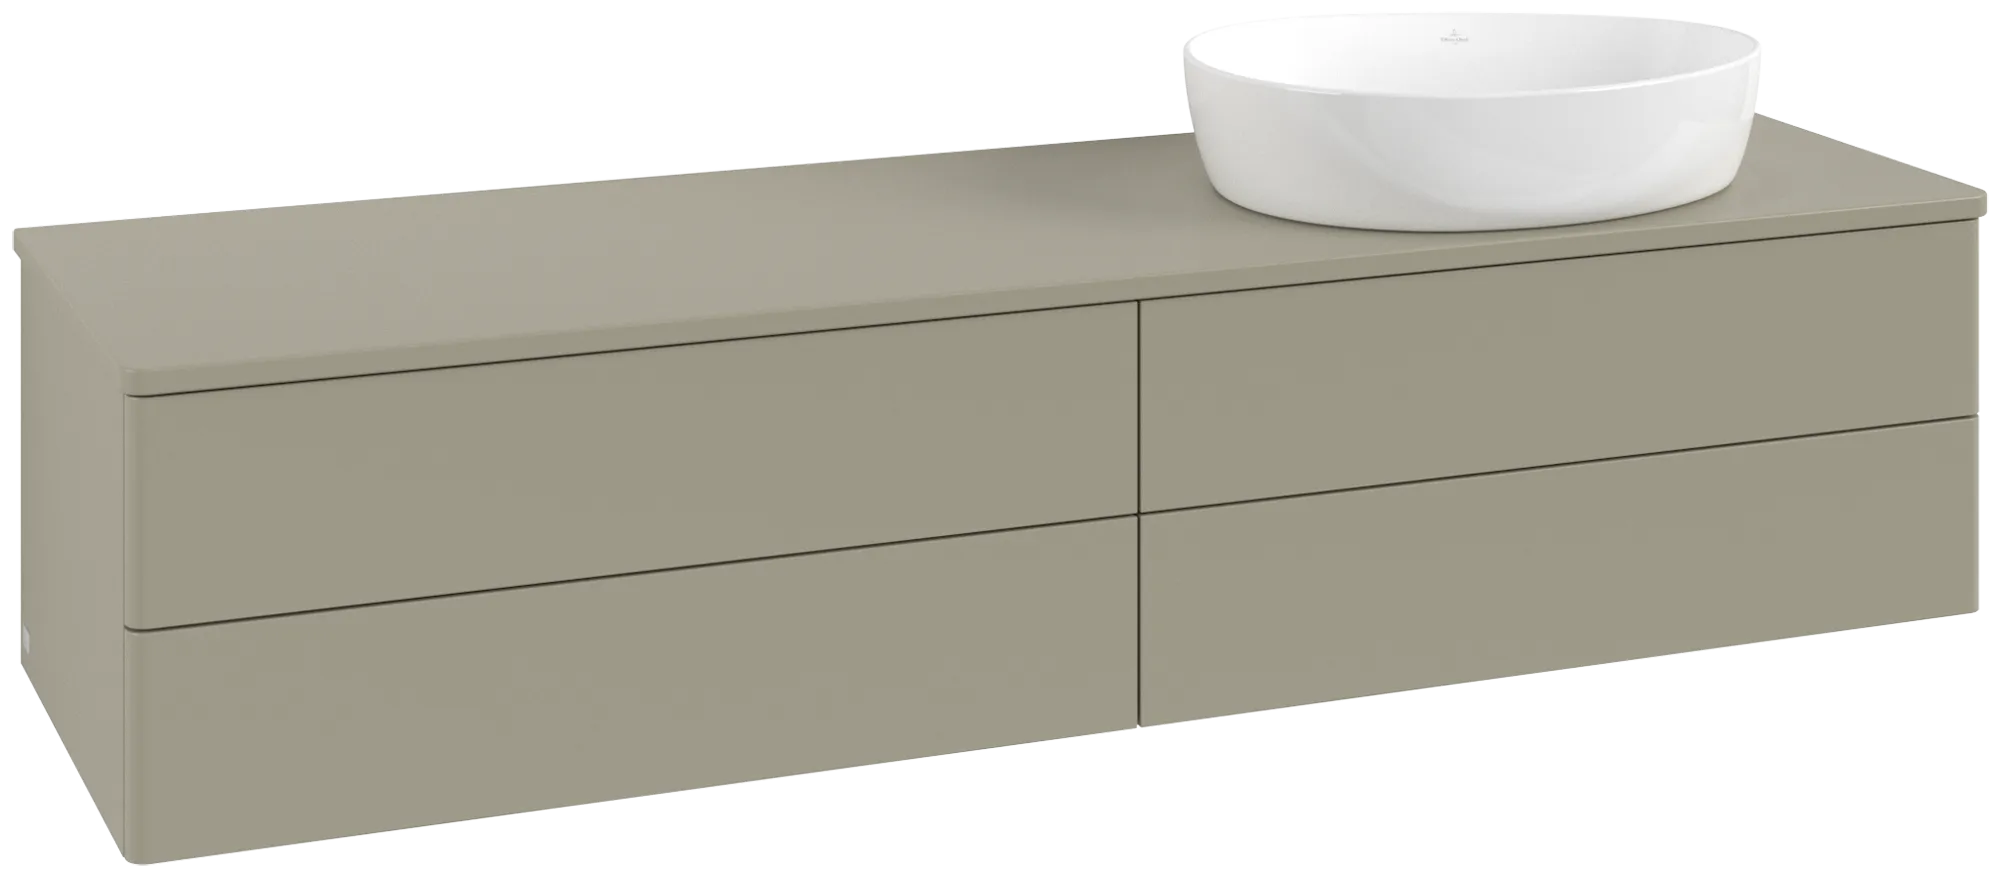 Picture of VILLEROY BOCH Antao Vanity unit, with lighting, 4 pull-out compartments, 1600 x 360 x 500 mm, Front without structure, Stone Grey Matt Lacquer / Stone Grey Matt Lacquer #L27050HK